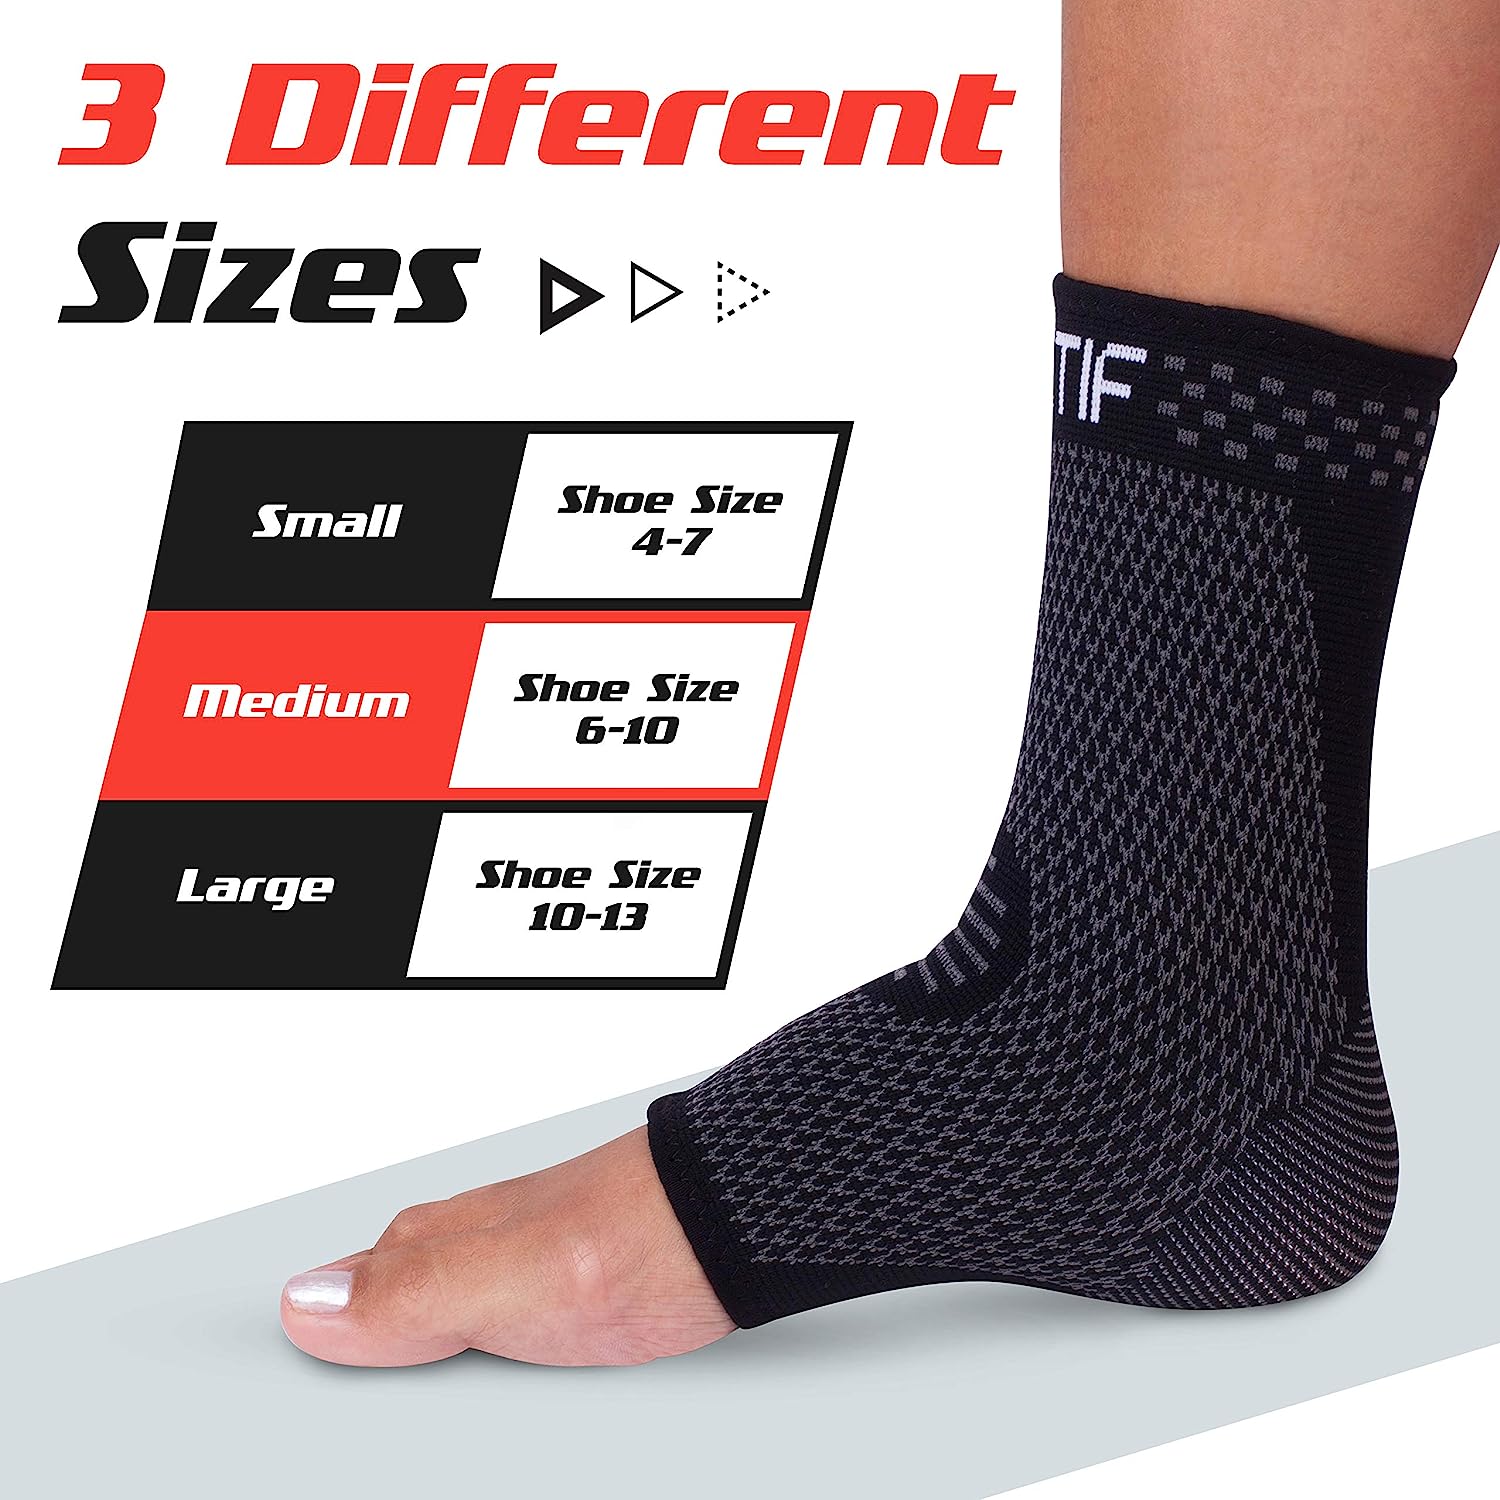 Actif Sports Ankle Compression Sleeve, 2 Pack